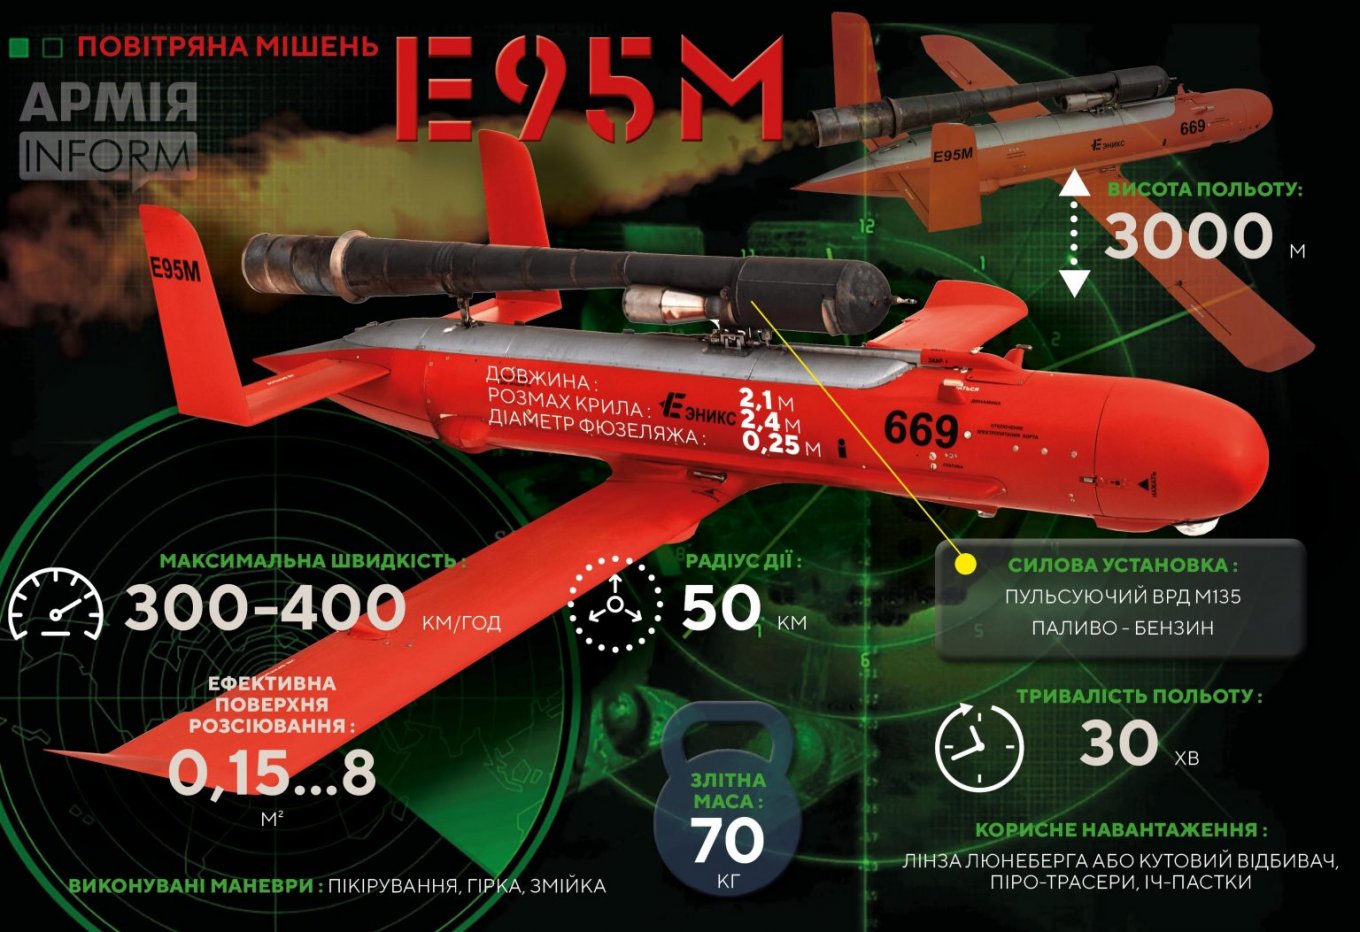 Russia Manufactures Wooded Drones For Reconnaissance And Ukraine’s Air Defense Distraction , Defense Express, war in Ukraine, Russian-Ukrainian war